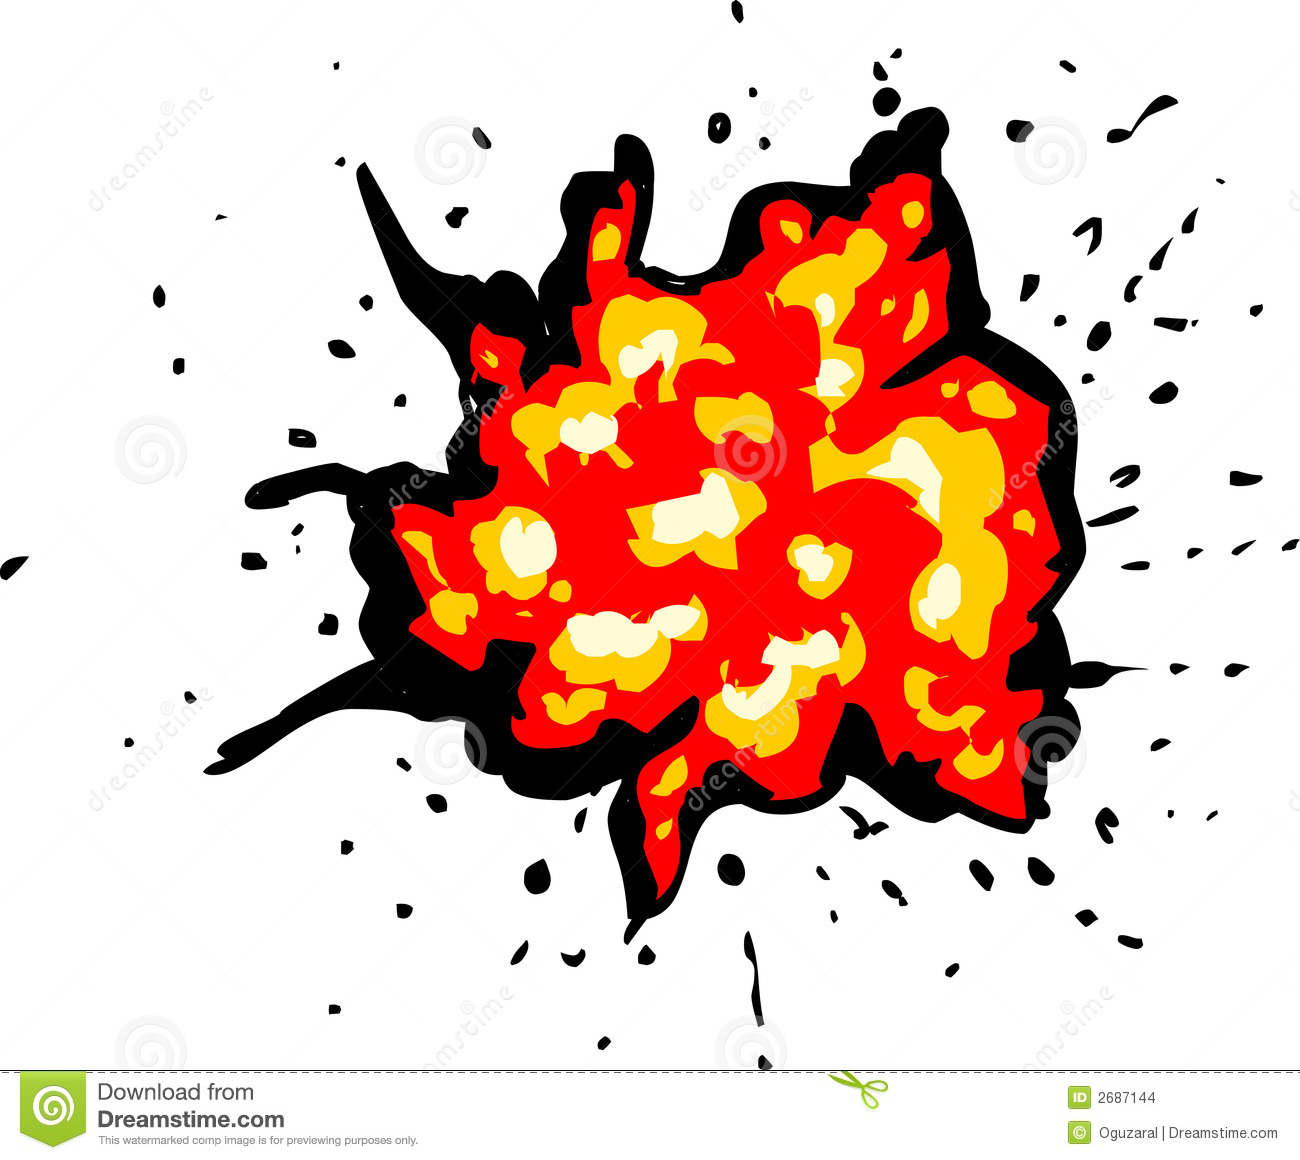 Explosion Stock Images   Image  2687144